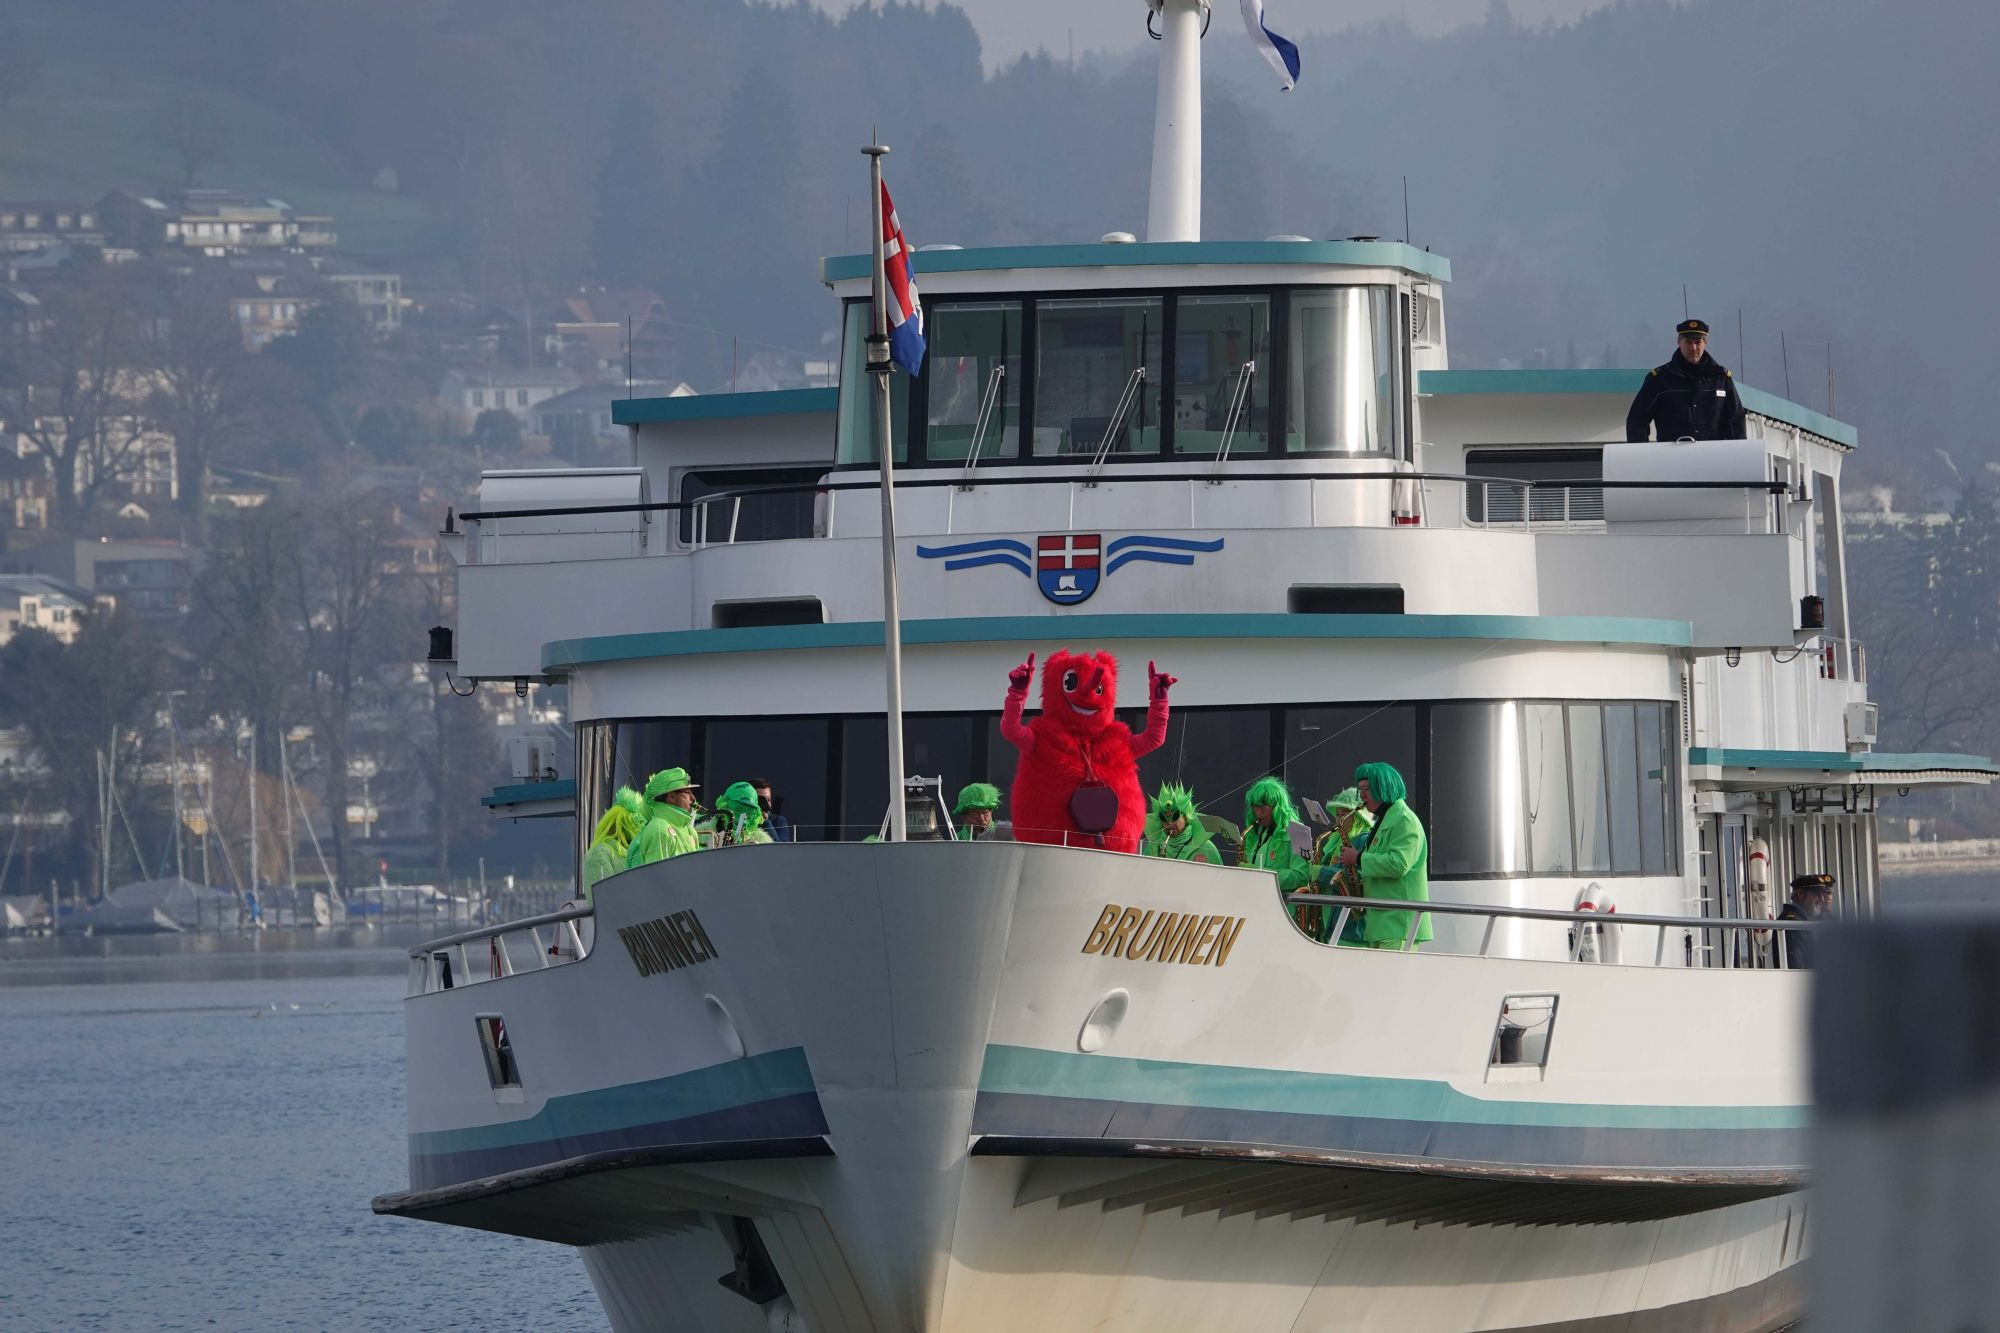 The mascot was revealed to mark one year to go until Lucerne 2021 ©Lucerne 2021